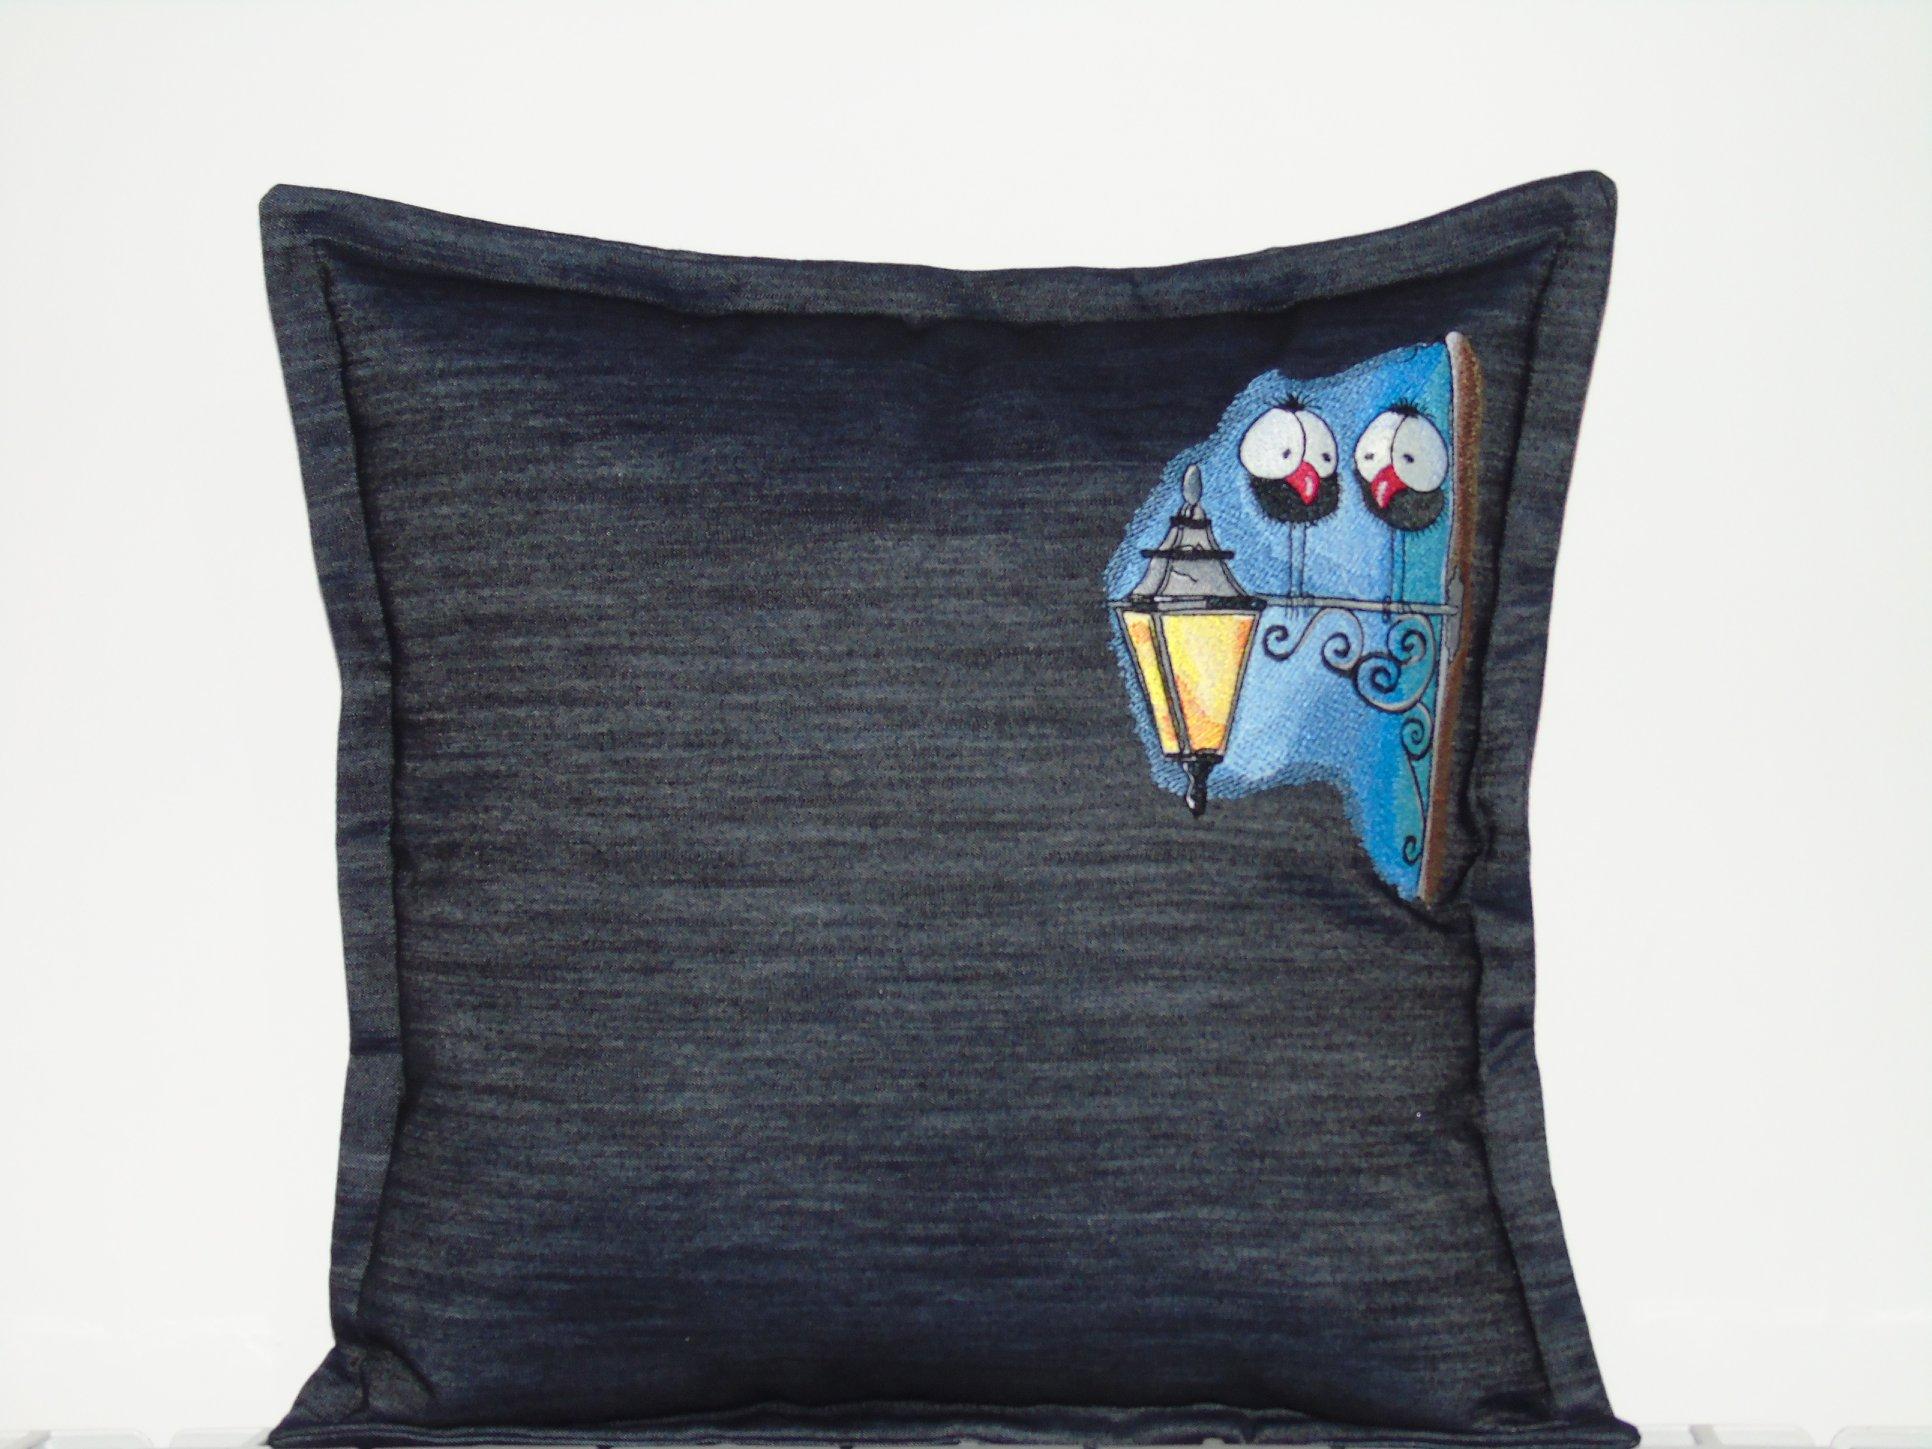 Embroidered cushion with Two birds design